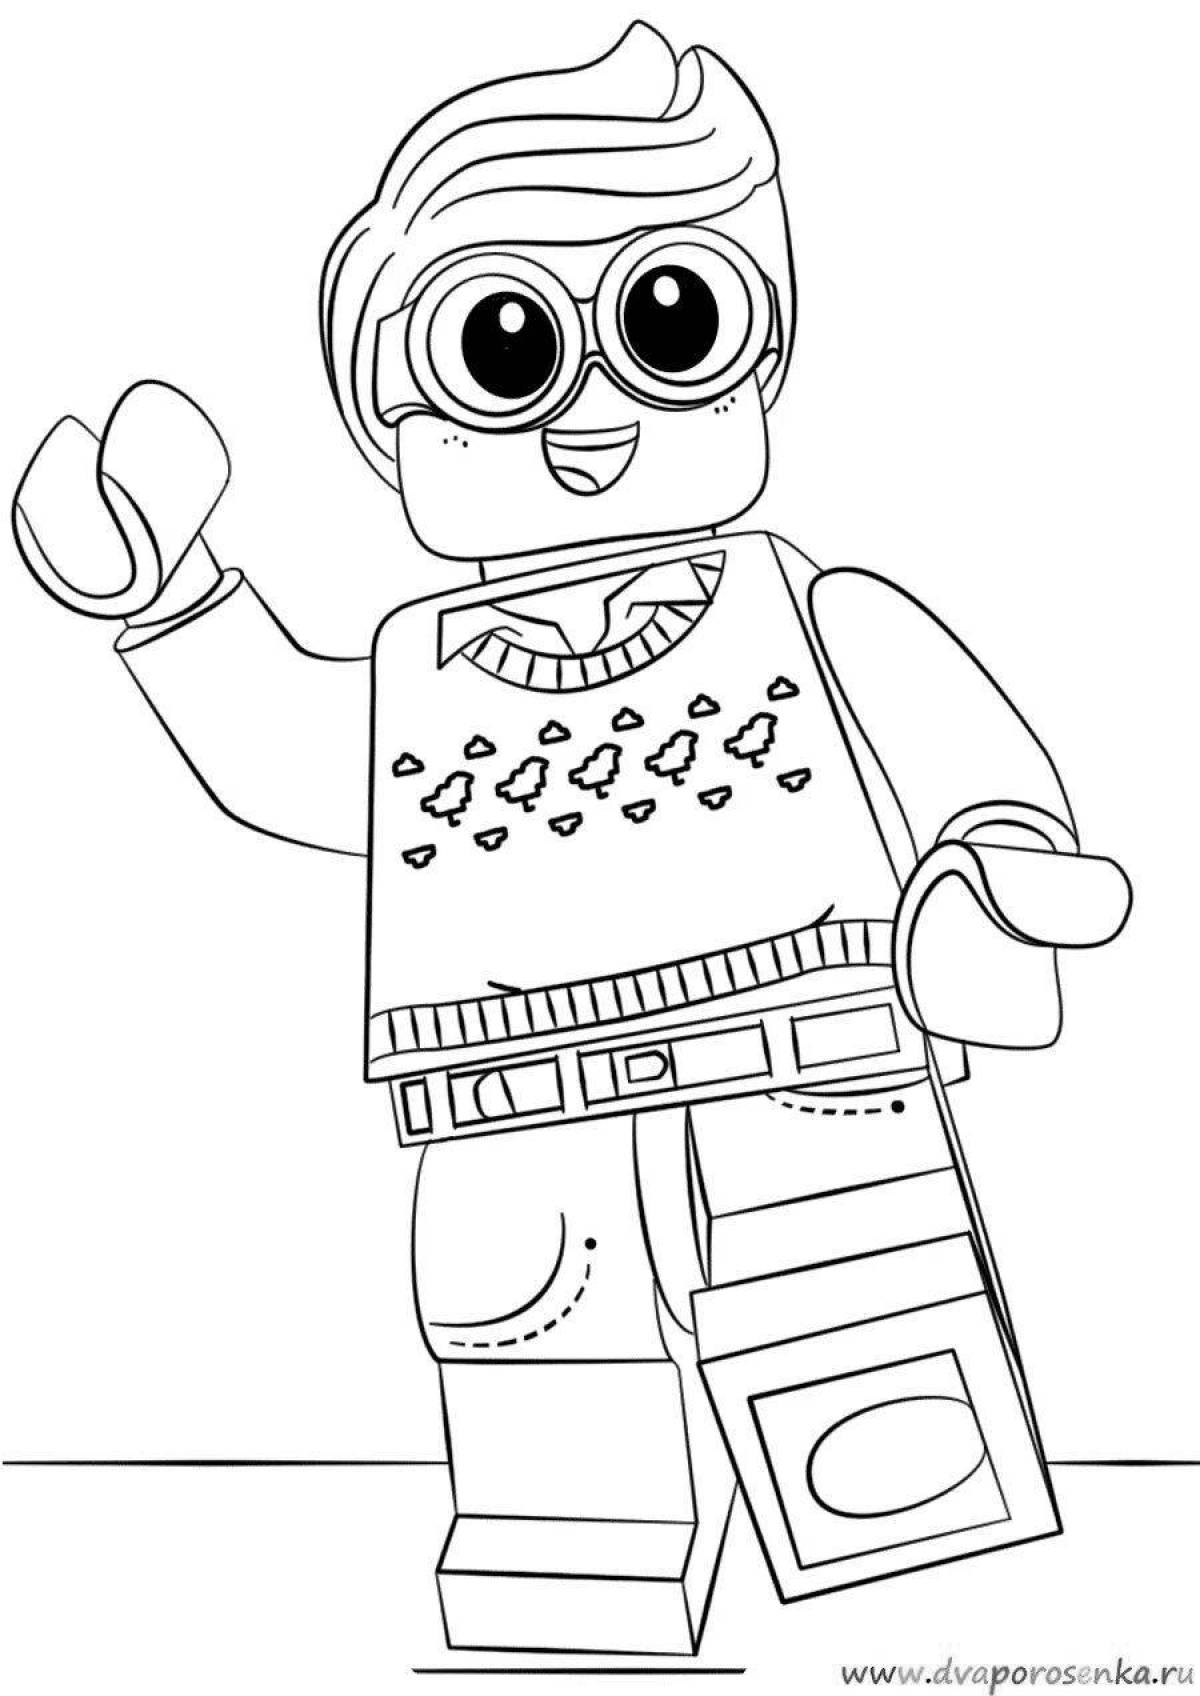 Bright lego figures coloring book